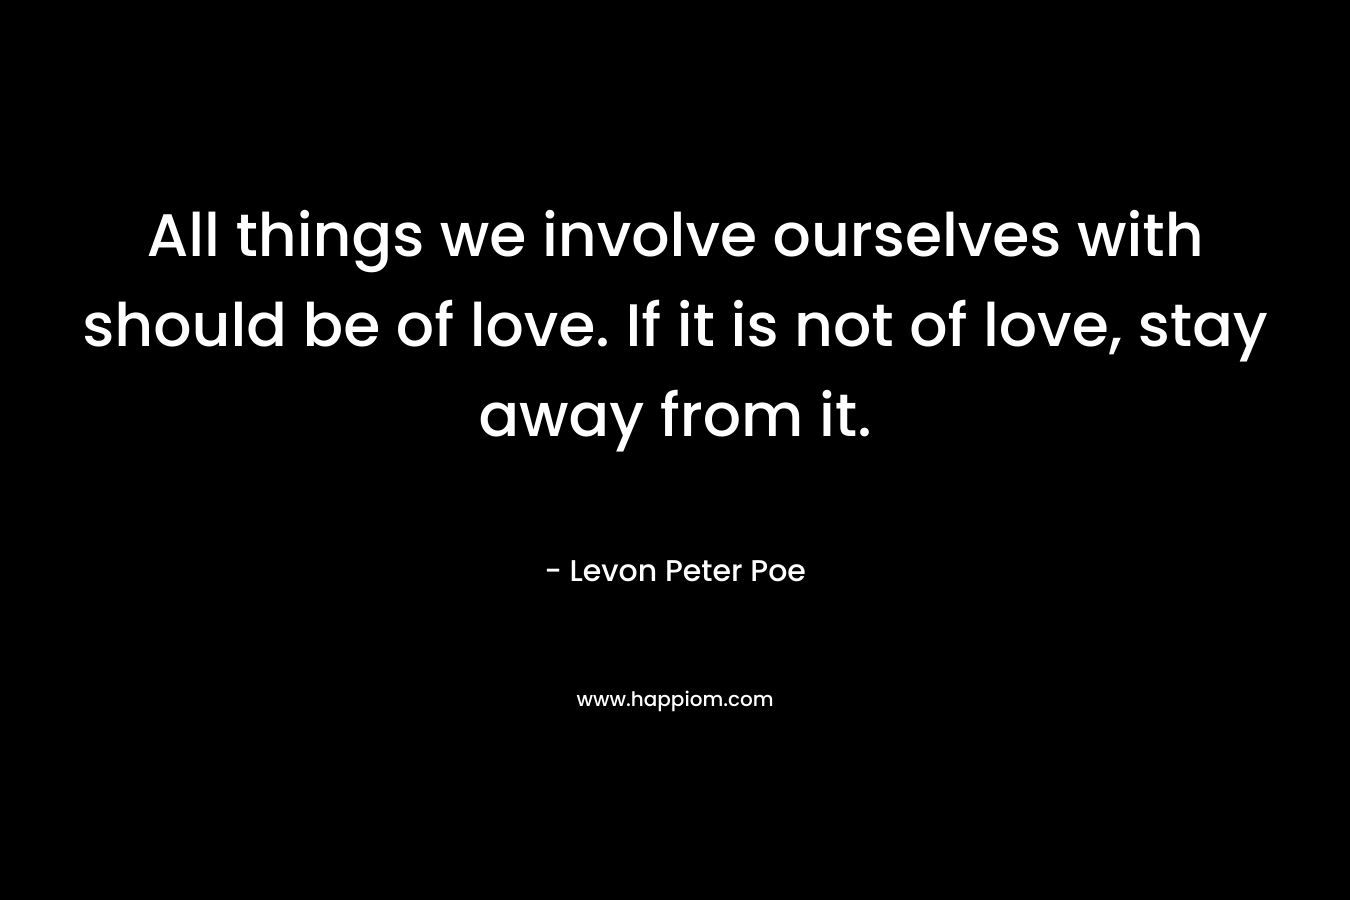 All things we involve ourselves with should be of love. If it is not of love, stay away from it.